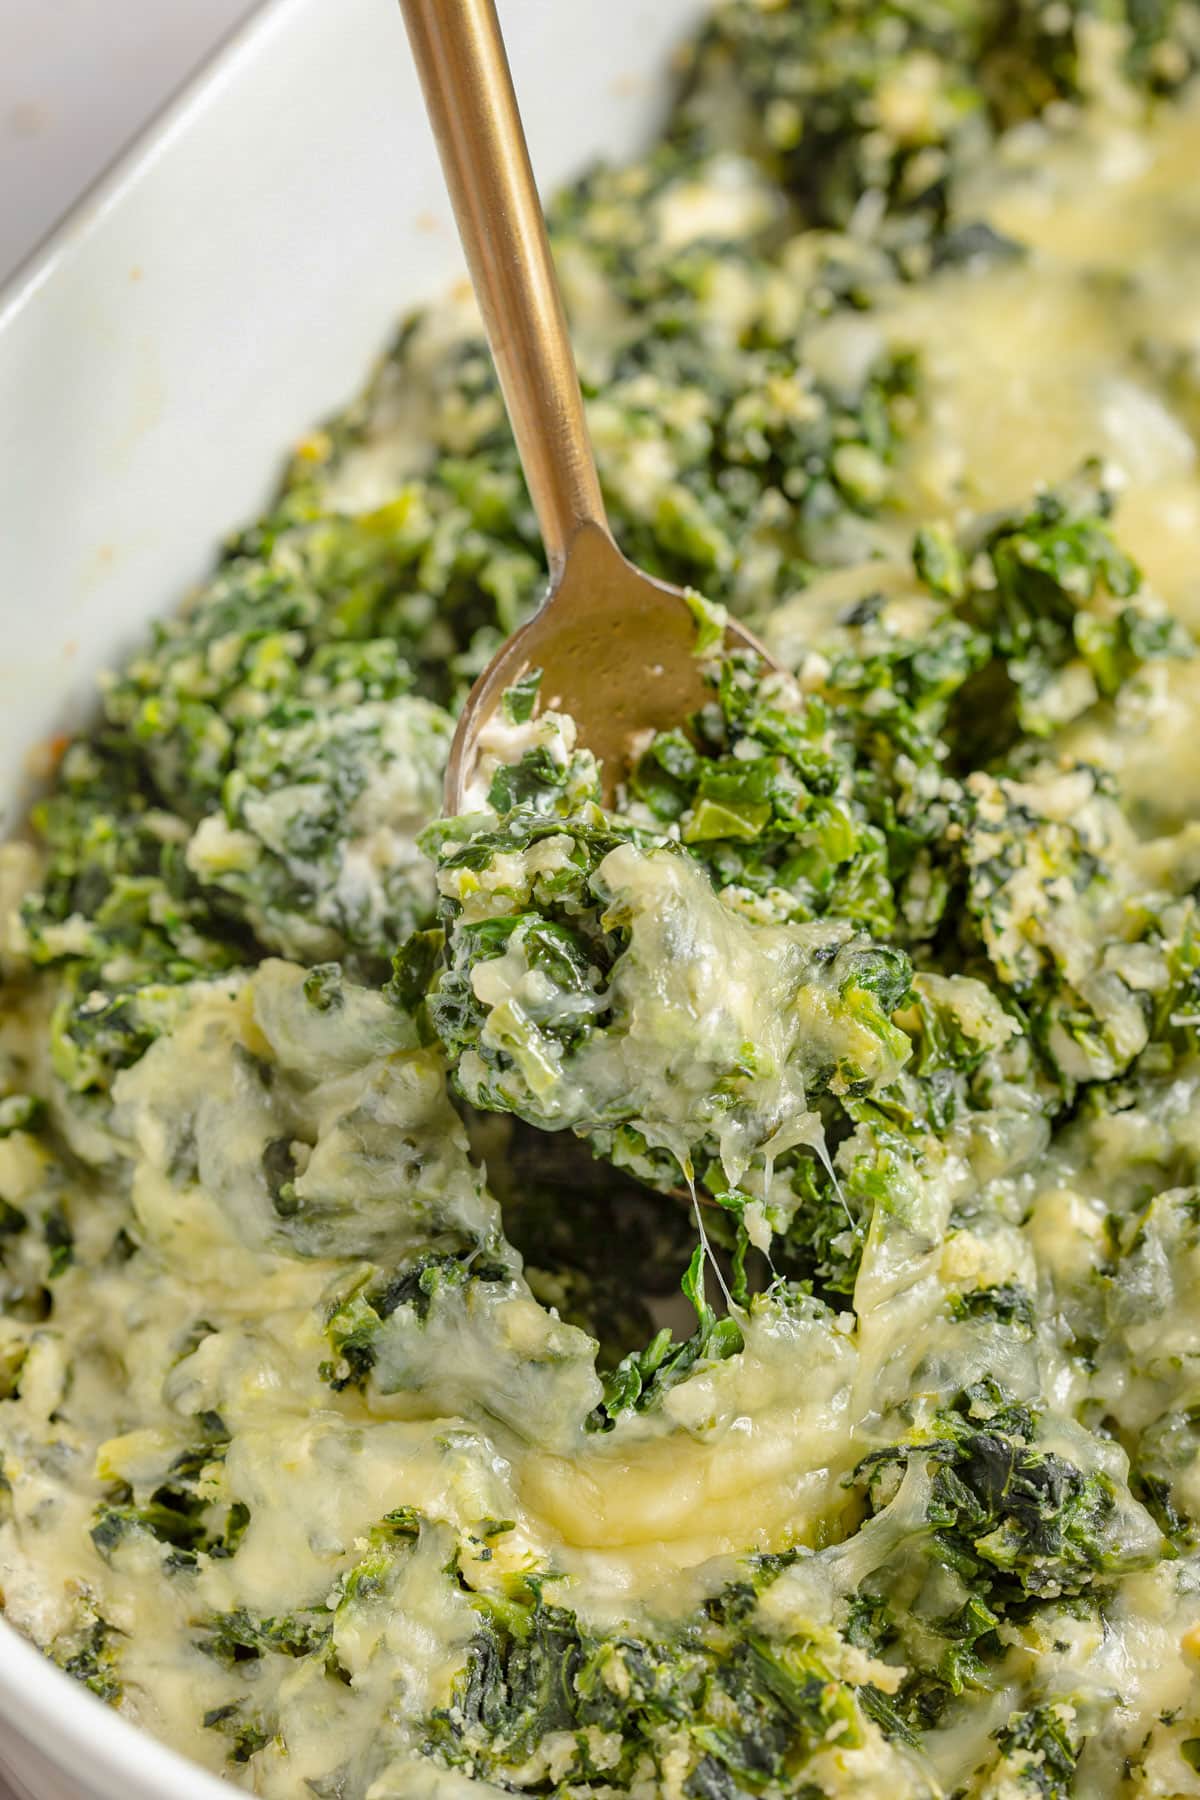 Cheesy parmesan spinach casserole being scooped out of a casserole dish with a gold spoon.